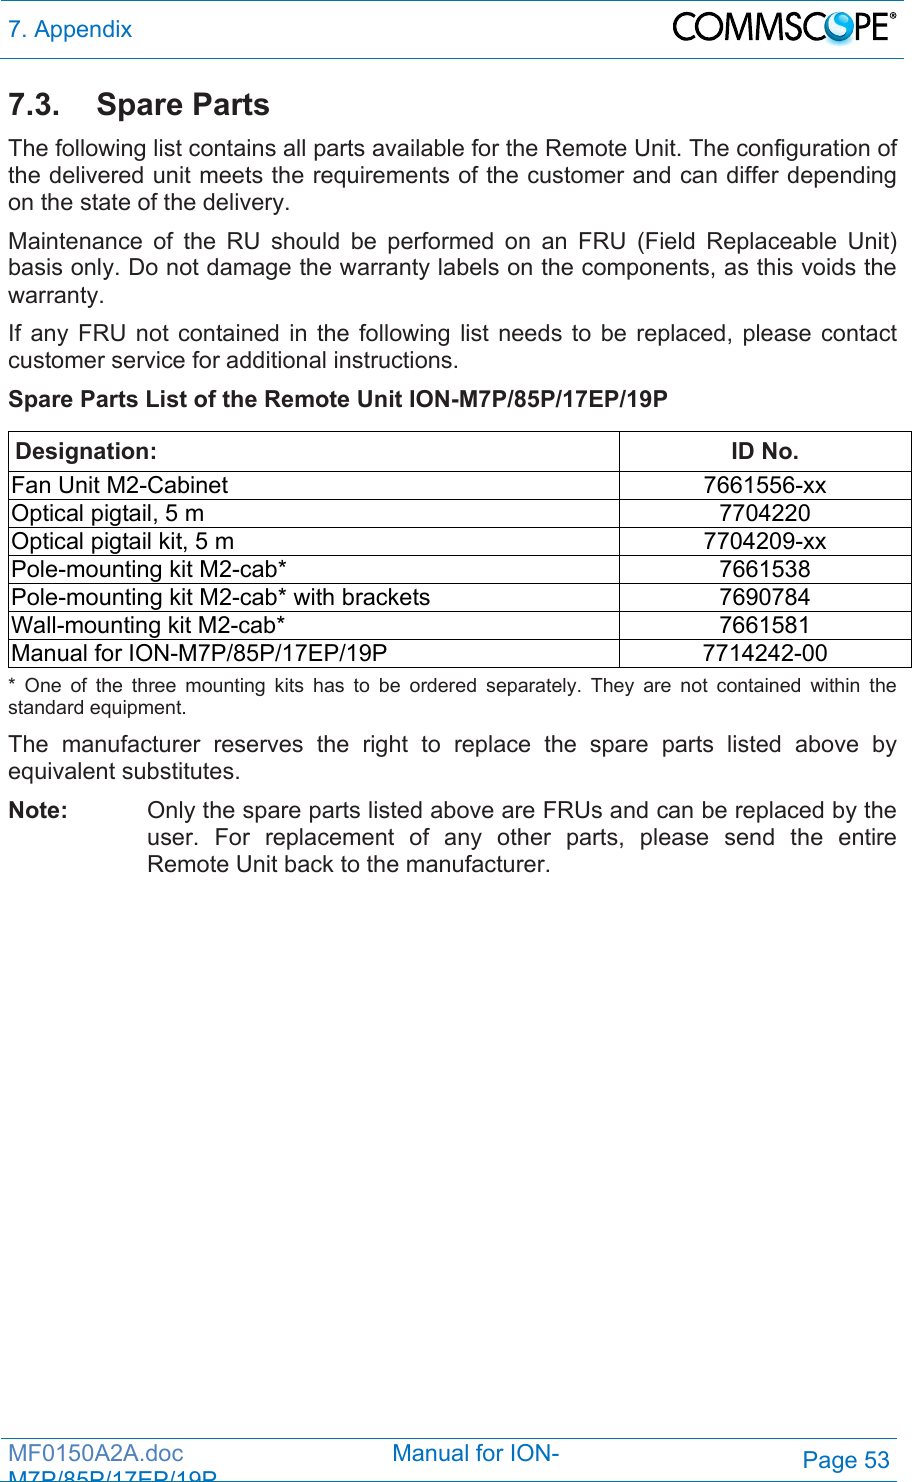 7. Appendix  MF0150A2A.doc                                Manual for ION-M7P/85P/17EP/19PPage 53 7.3. Spare Parts The following list contains all parts available for the Remote Unit. The configuration of the delivered unit meets the requirements of the customer and can differ depending on the state of the delivery.  Maintenance of the RU should be performed on an FRU (Field Replaceable Unit) basis only. Do not damage the warranty labels on the components, as this voids the warranty.  If any FRU not contained in the following list needs to be replaced, please contact customer service for additional instructions. Spare Parts List of the Remote Unit ION-M7P/85P/17EP/19P  Designation: ID No. Fan Unit M2-Cabinet  7661556-xx Optical pigtail, 5 m  7704220 Optical pigtail kit, 5 m  7704209-xx Pole-mounting kit M2-cab*  7661538 Pole-mounting kit M2-cab* with brackets  7690784 Wall-mounting kit M2-cab*  7661581 Manual for ION-M7P/85P/17EP/19P  7714242-00 * One of the three mounting kits has to be ordered separately. They are not contained within the standard equipment. The manufacturer reserves the right to replace the spare parts listed above by equivalent substitutes. Note:  Only the spare parts listed above are FRUs and can be replaced by the user. For replacement of any other parts, please send the entire Remote Unit back to the manufacturer.   